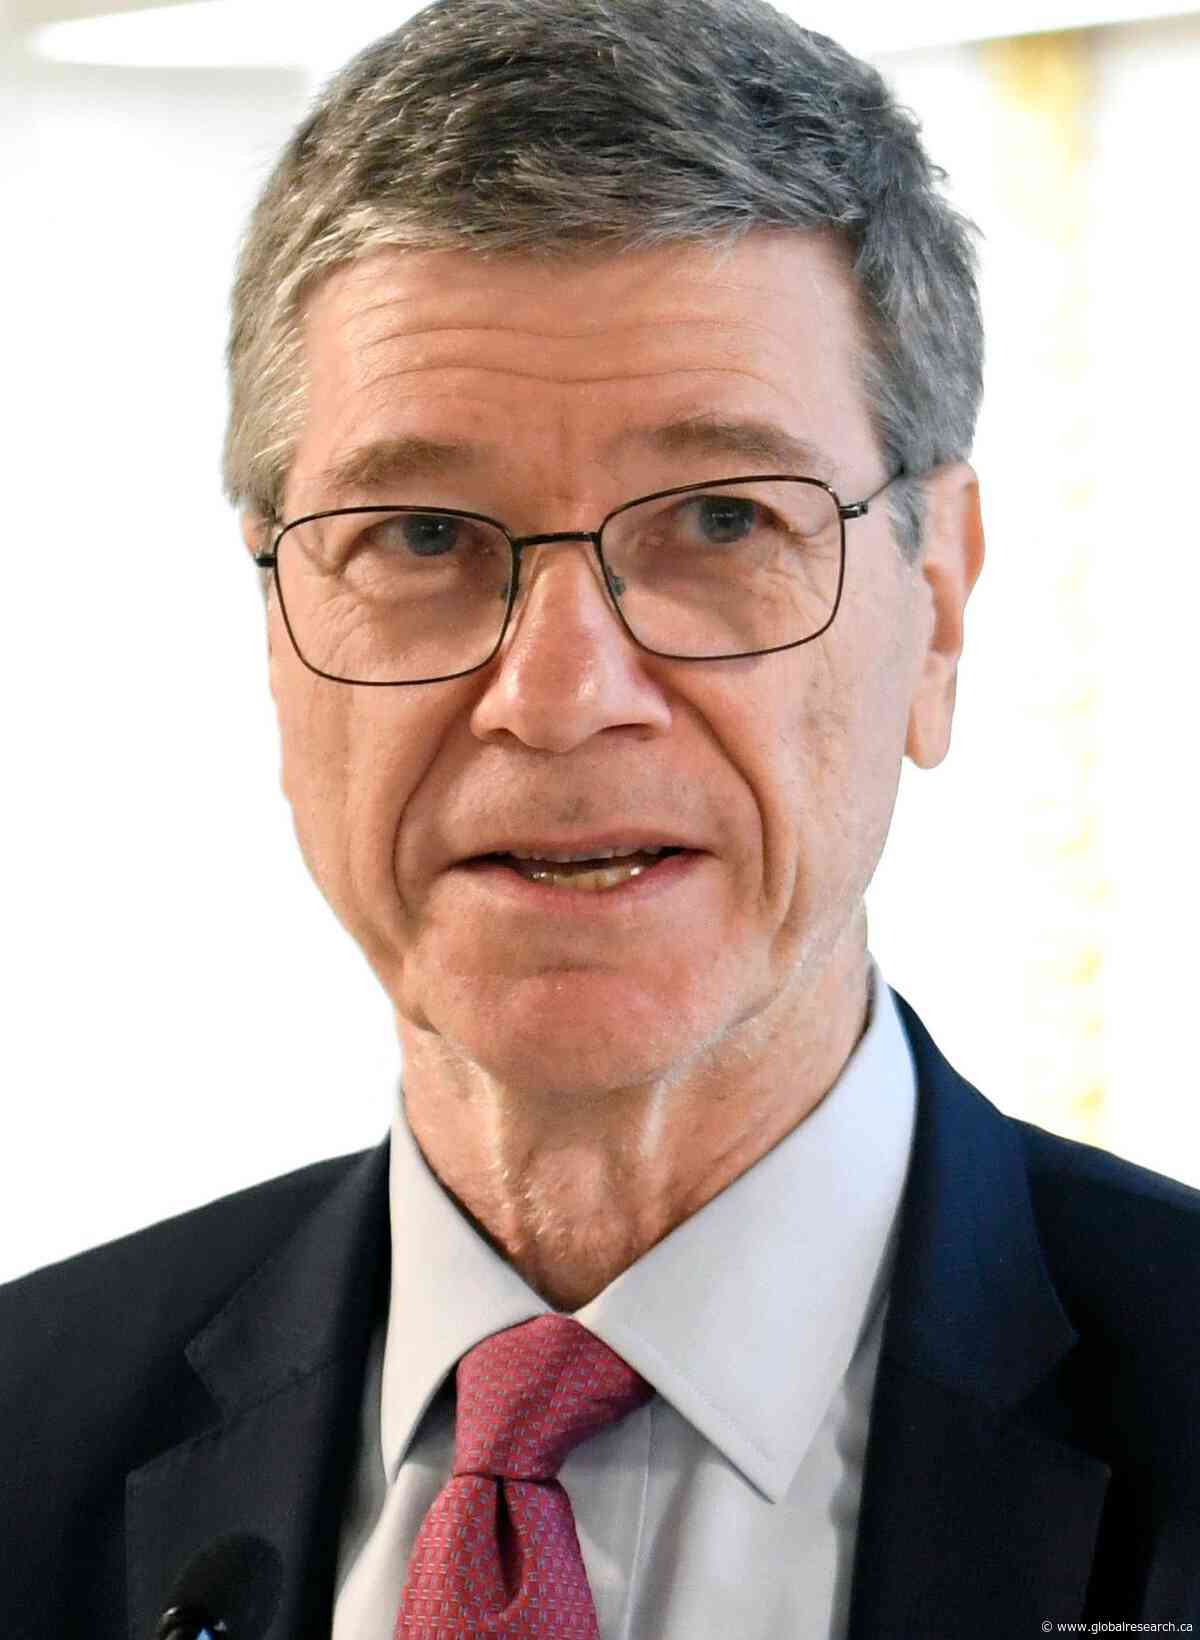 Jeffrey Sachs Blasts US Sanctions on Russia: “Just one absolutely naive idea after another.”